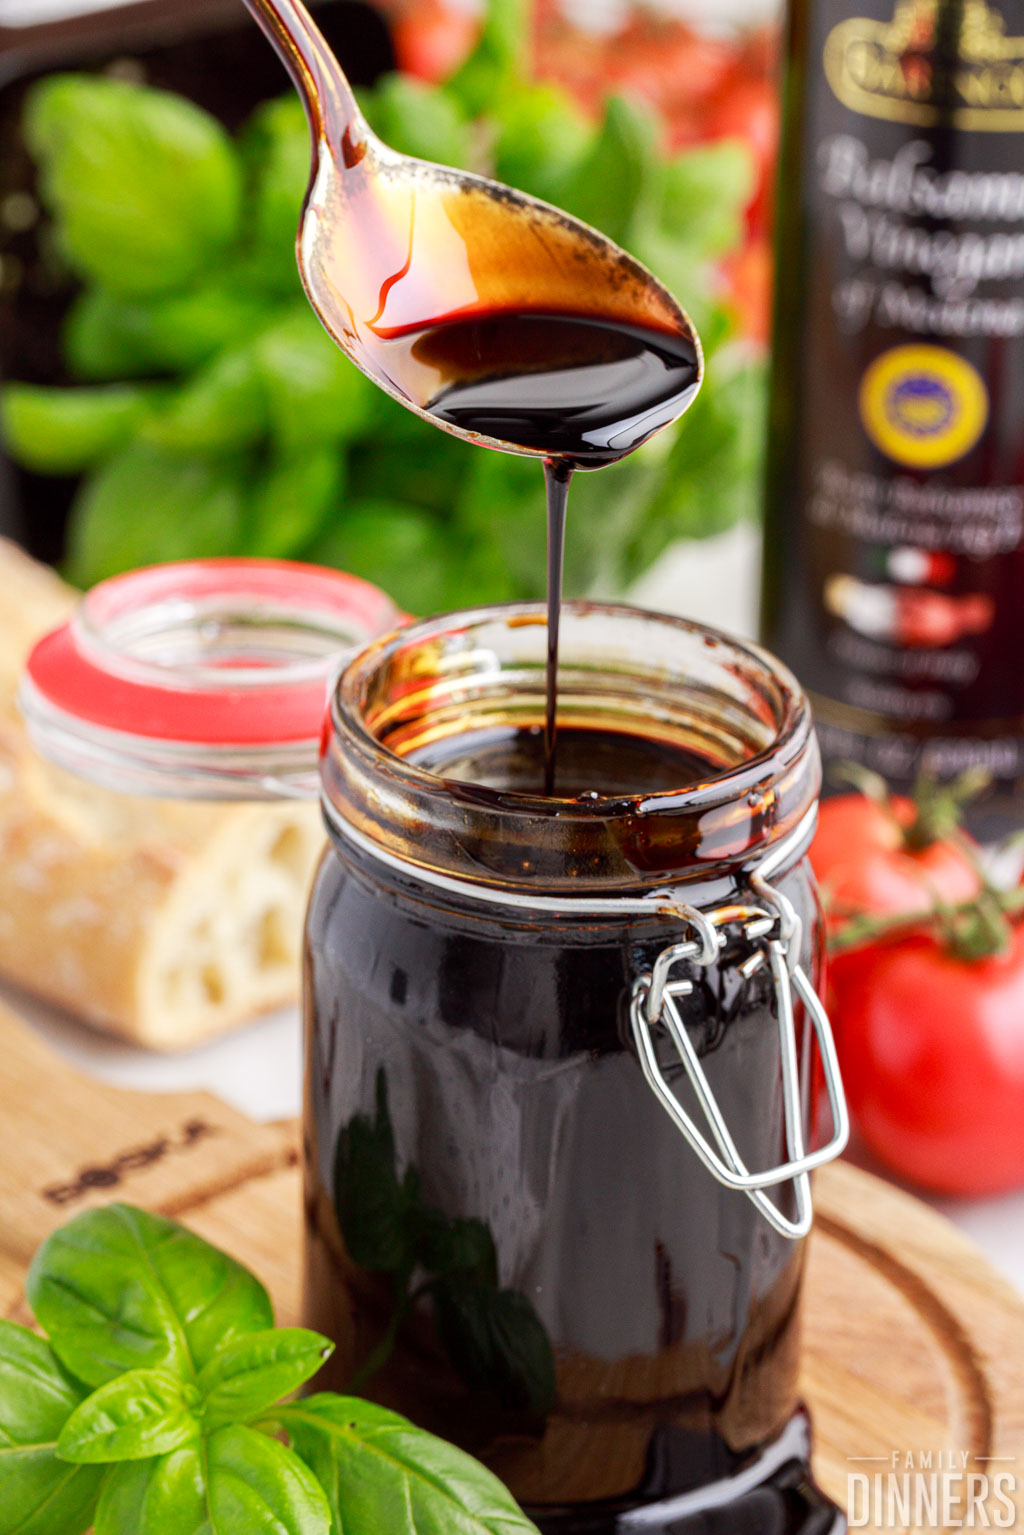 spoon drizzling balsamic glaze into a full jar of it